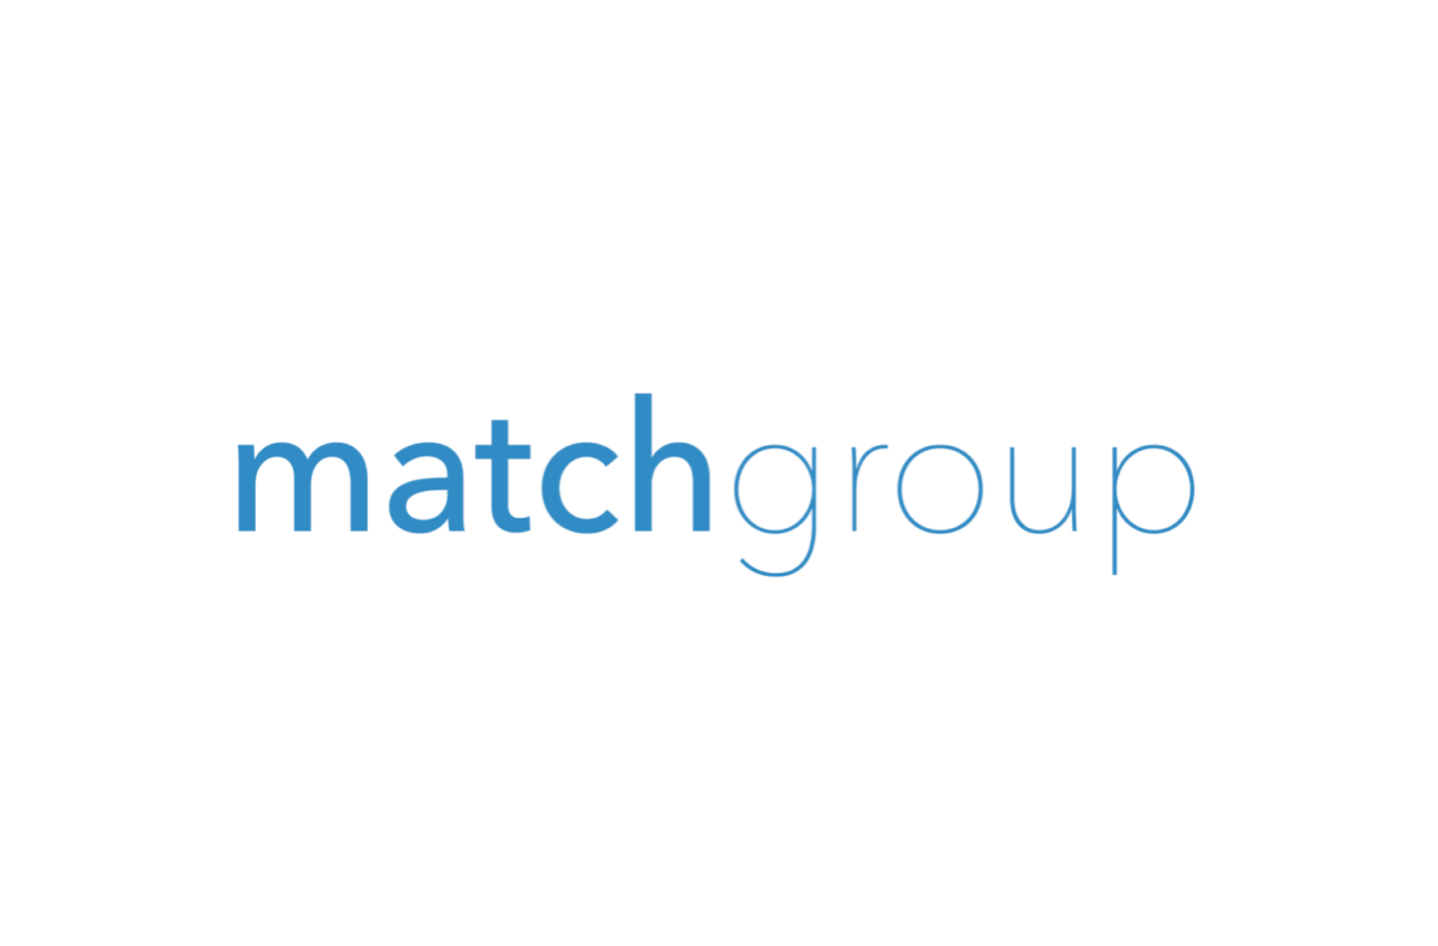 The Match Group